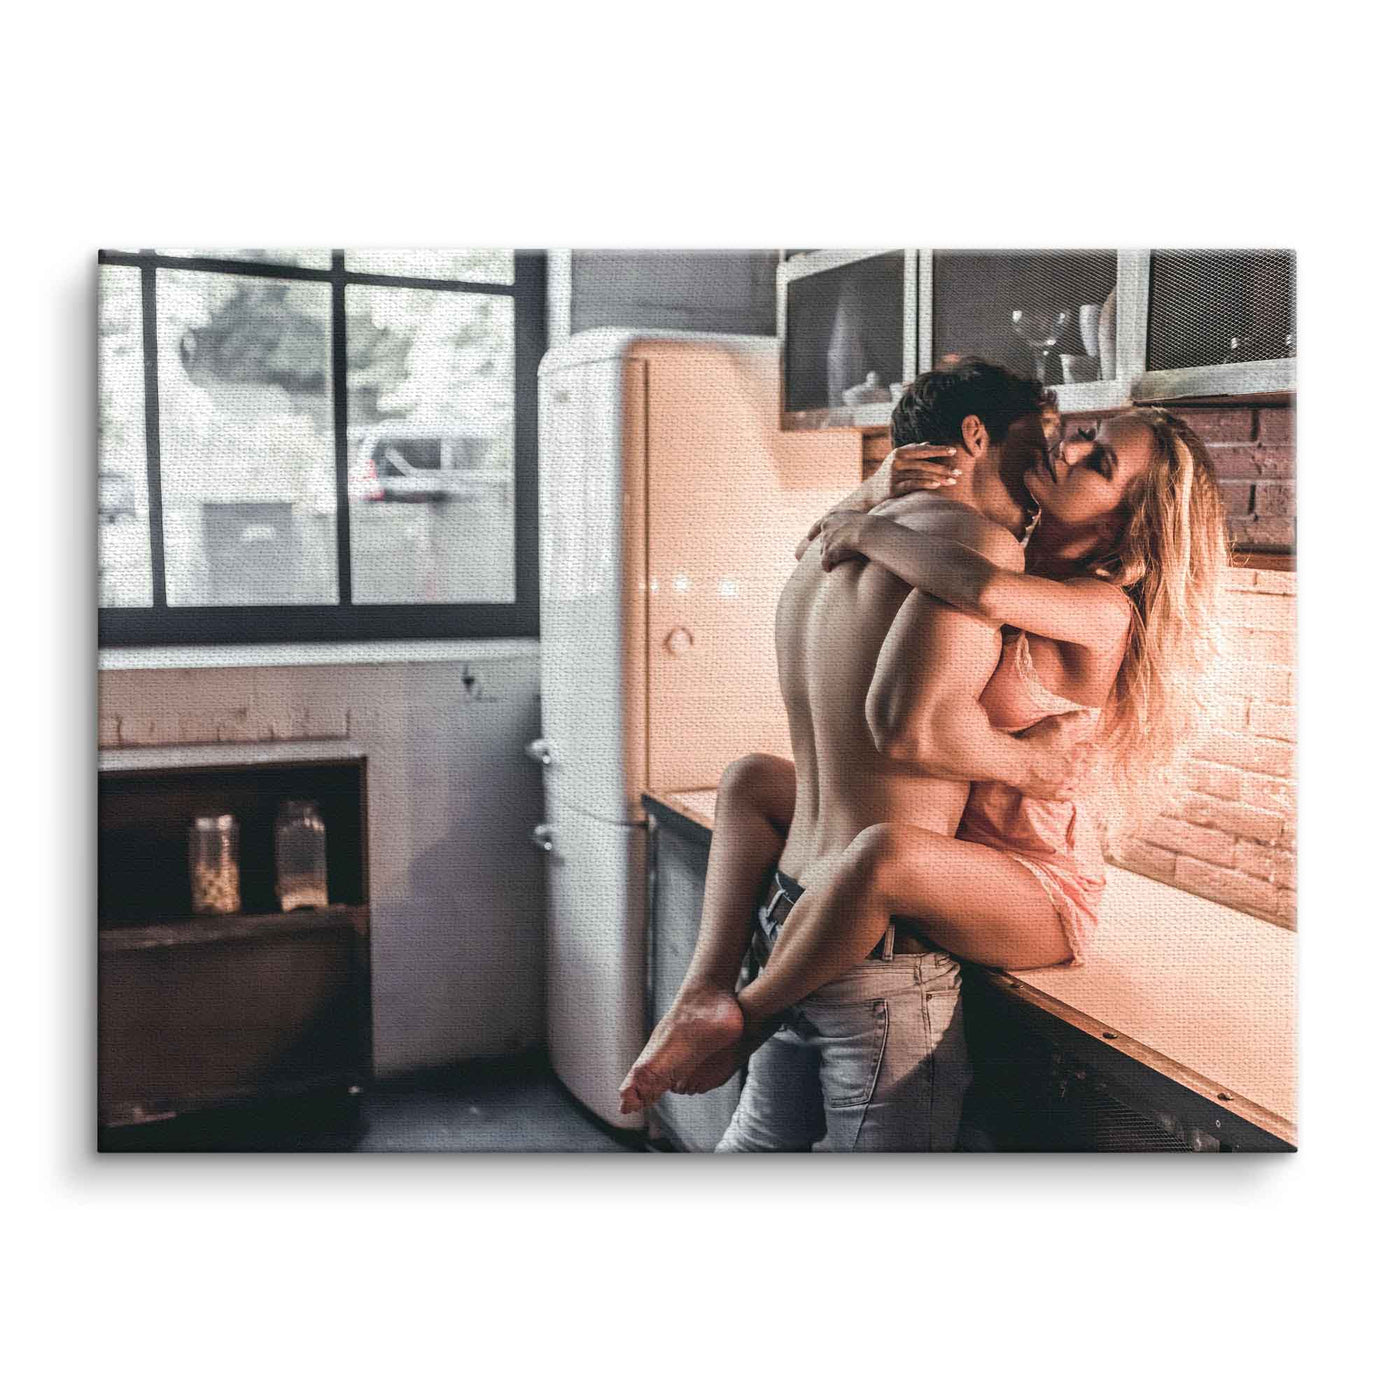 Sensual couple in the kitchen